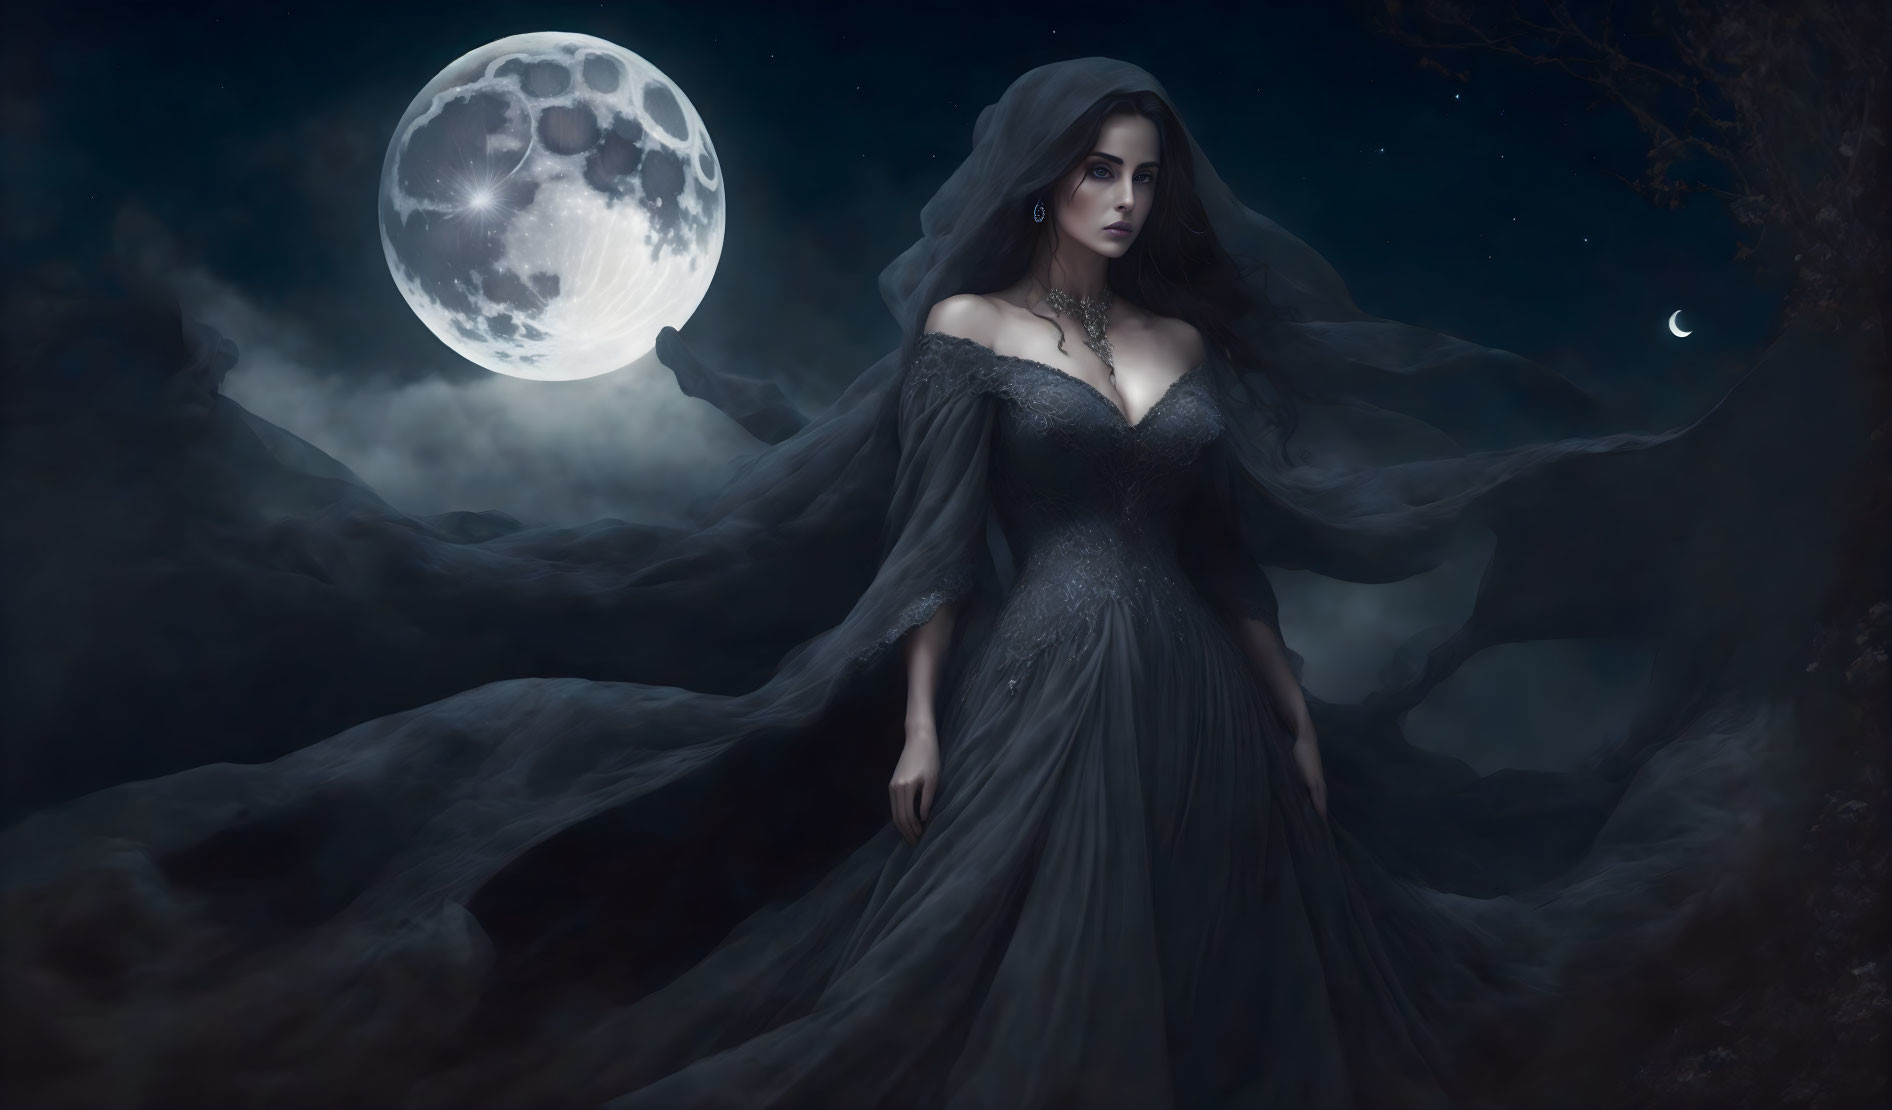 Mysterious woman under the moon